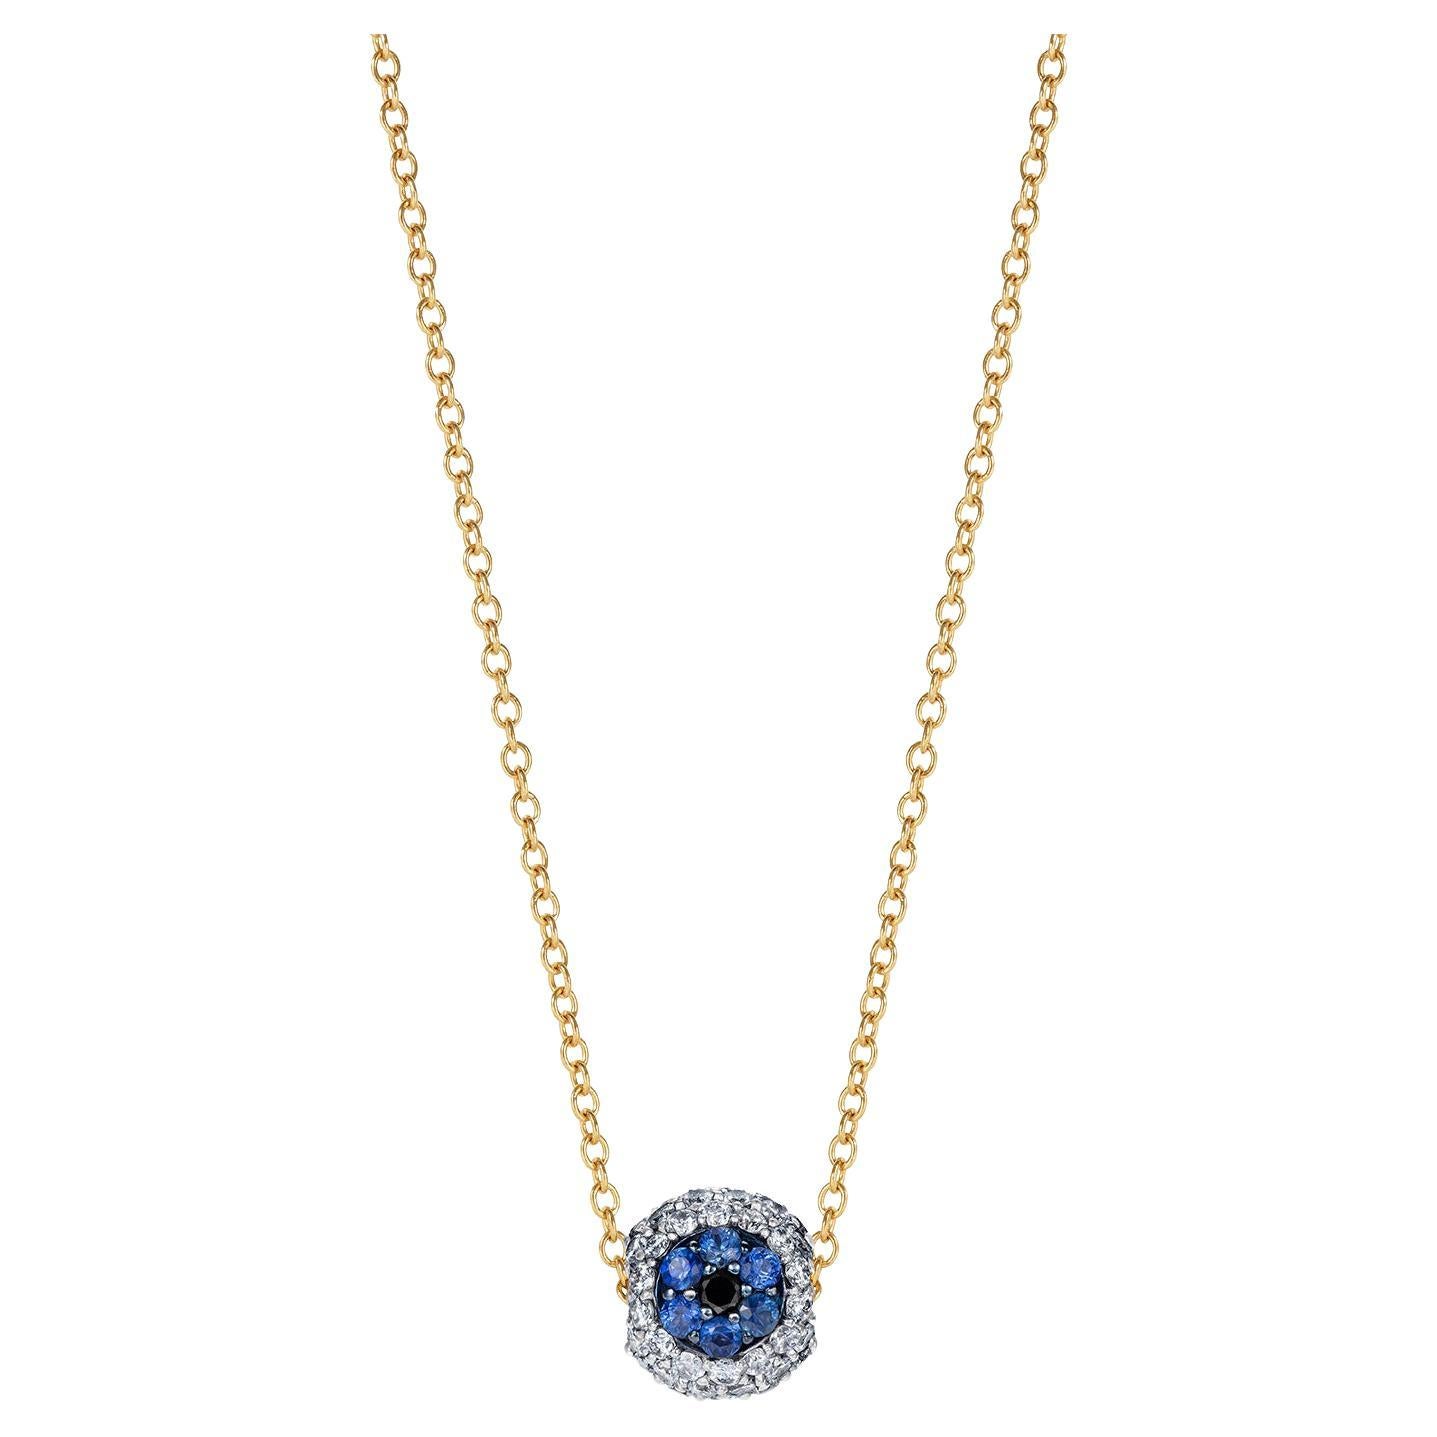 Sybarite Safety Pin All Seeing Eye Charm & Necklace in Yellow Gold & Sapphires